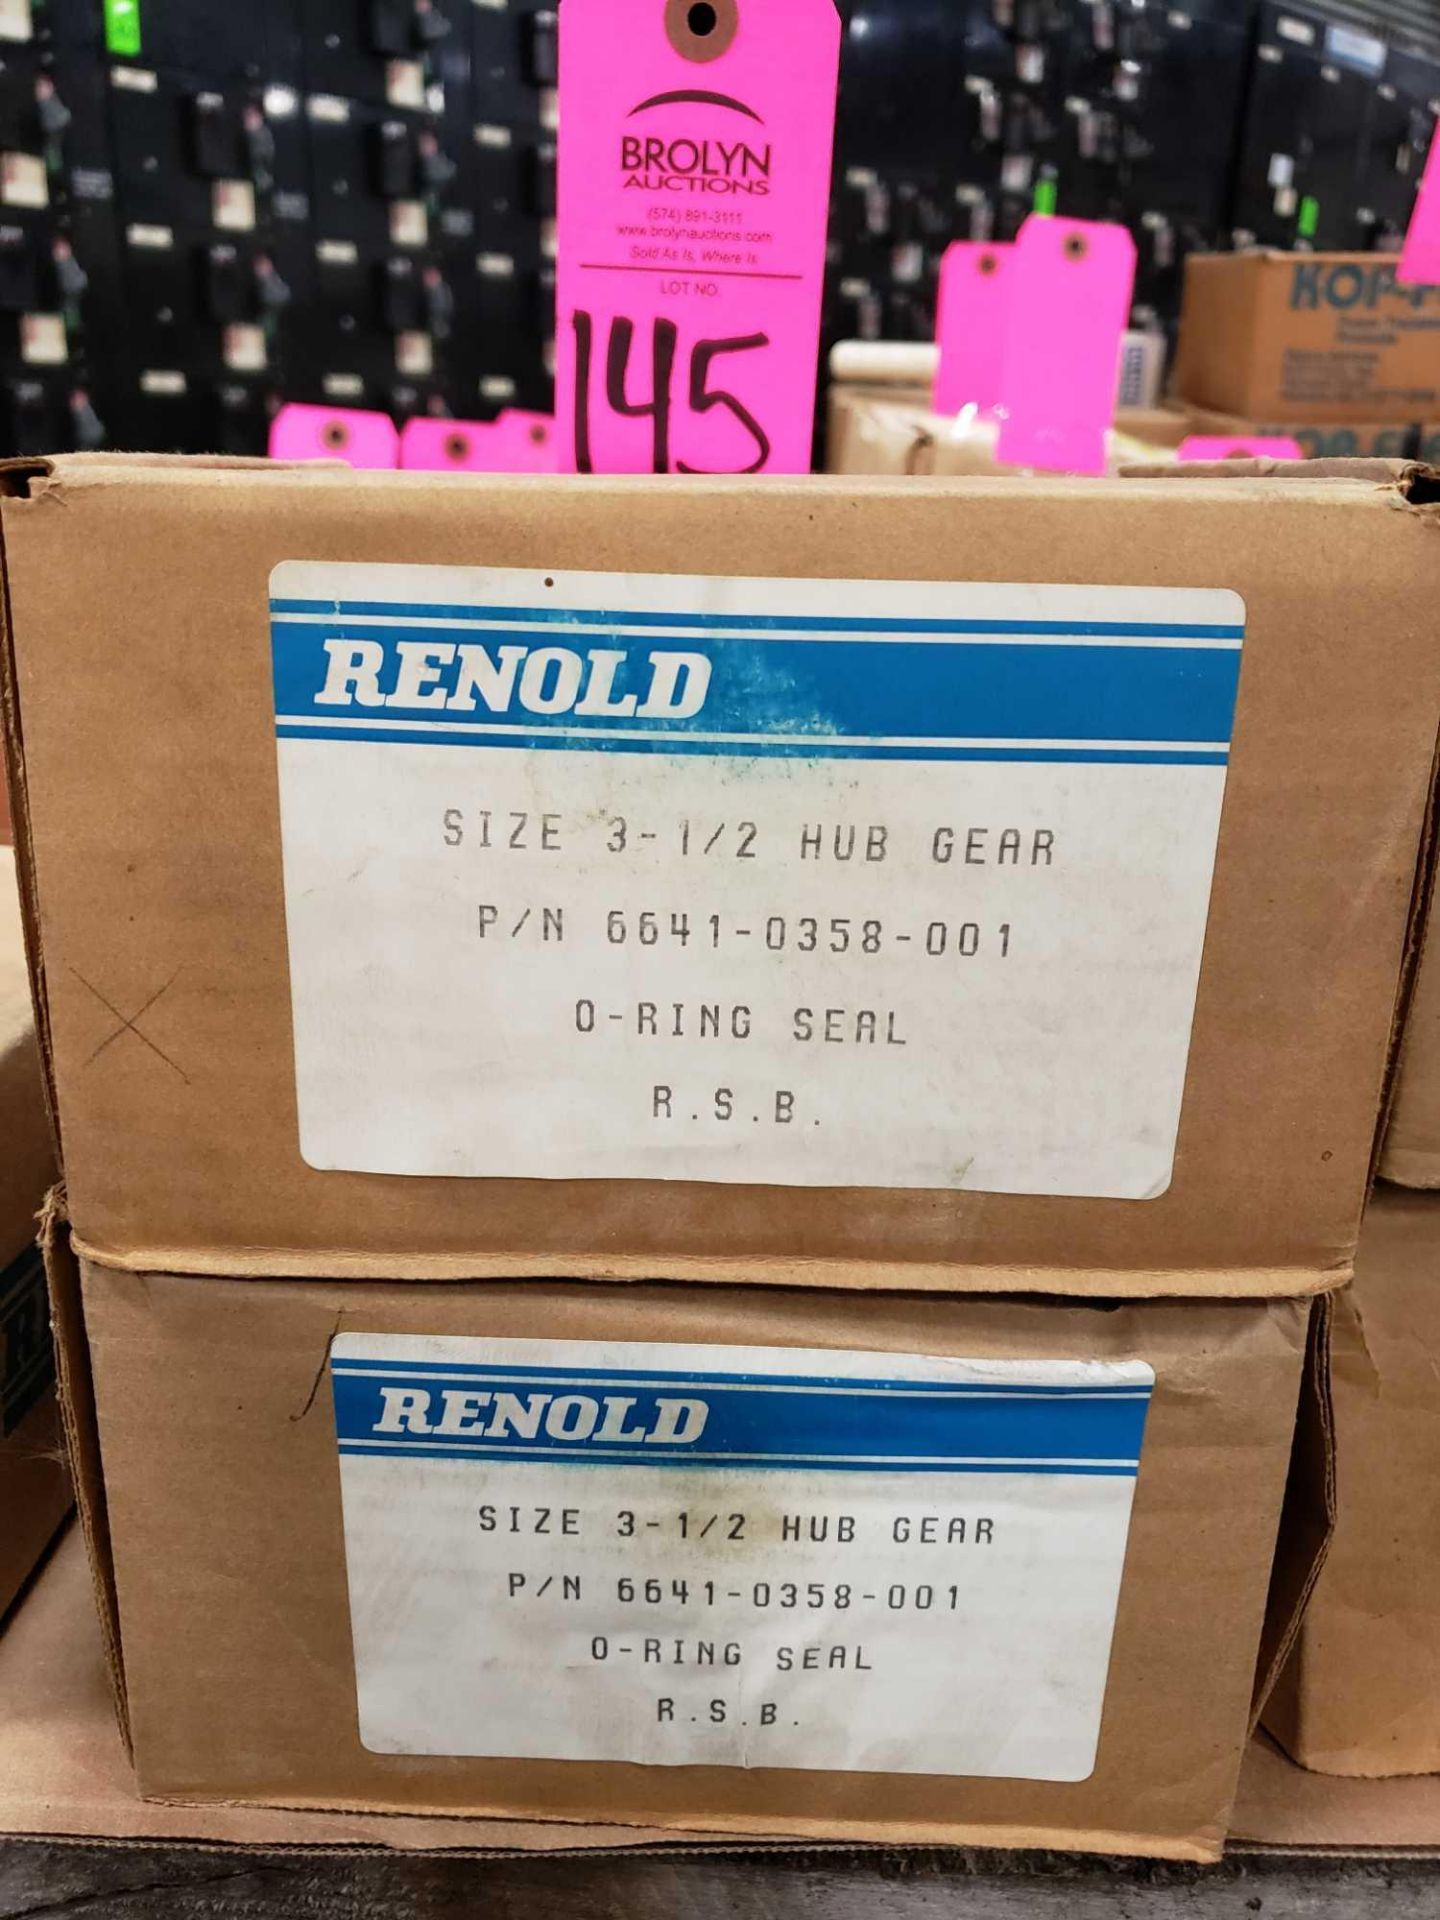 Qty 2 - Renold size 3-1/2 hub gear part number 6641-0358-001. New in box. - Image 2 of 2